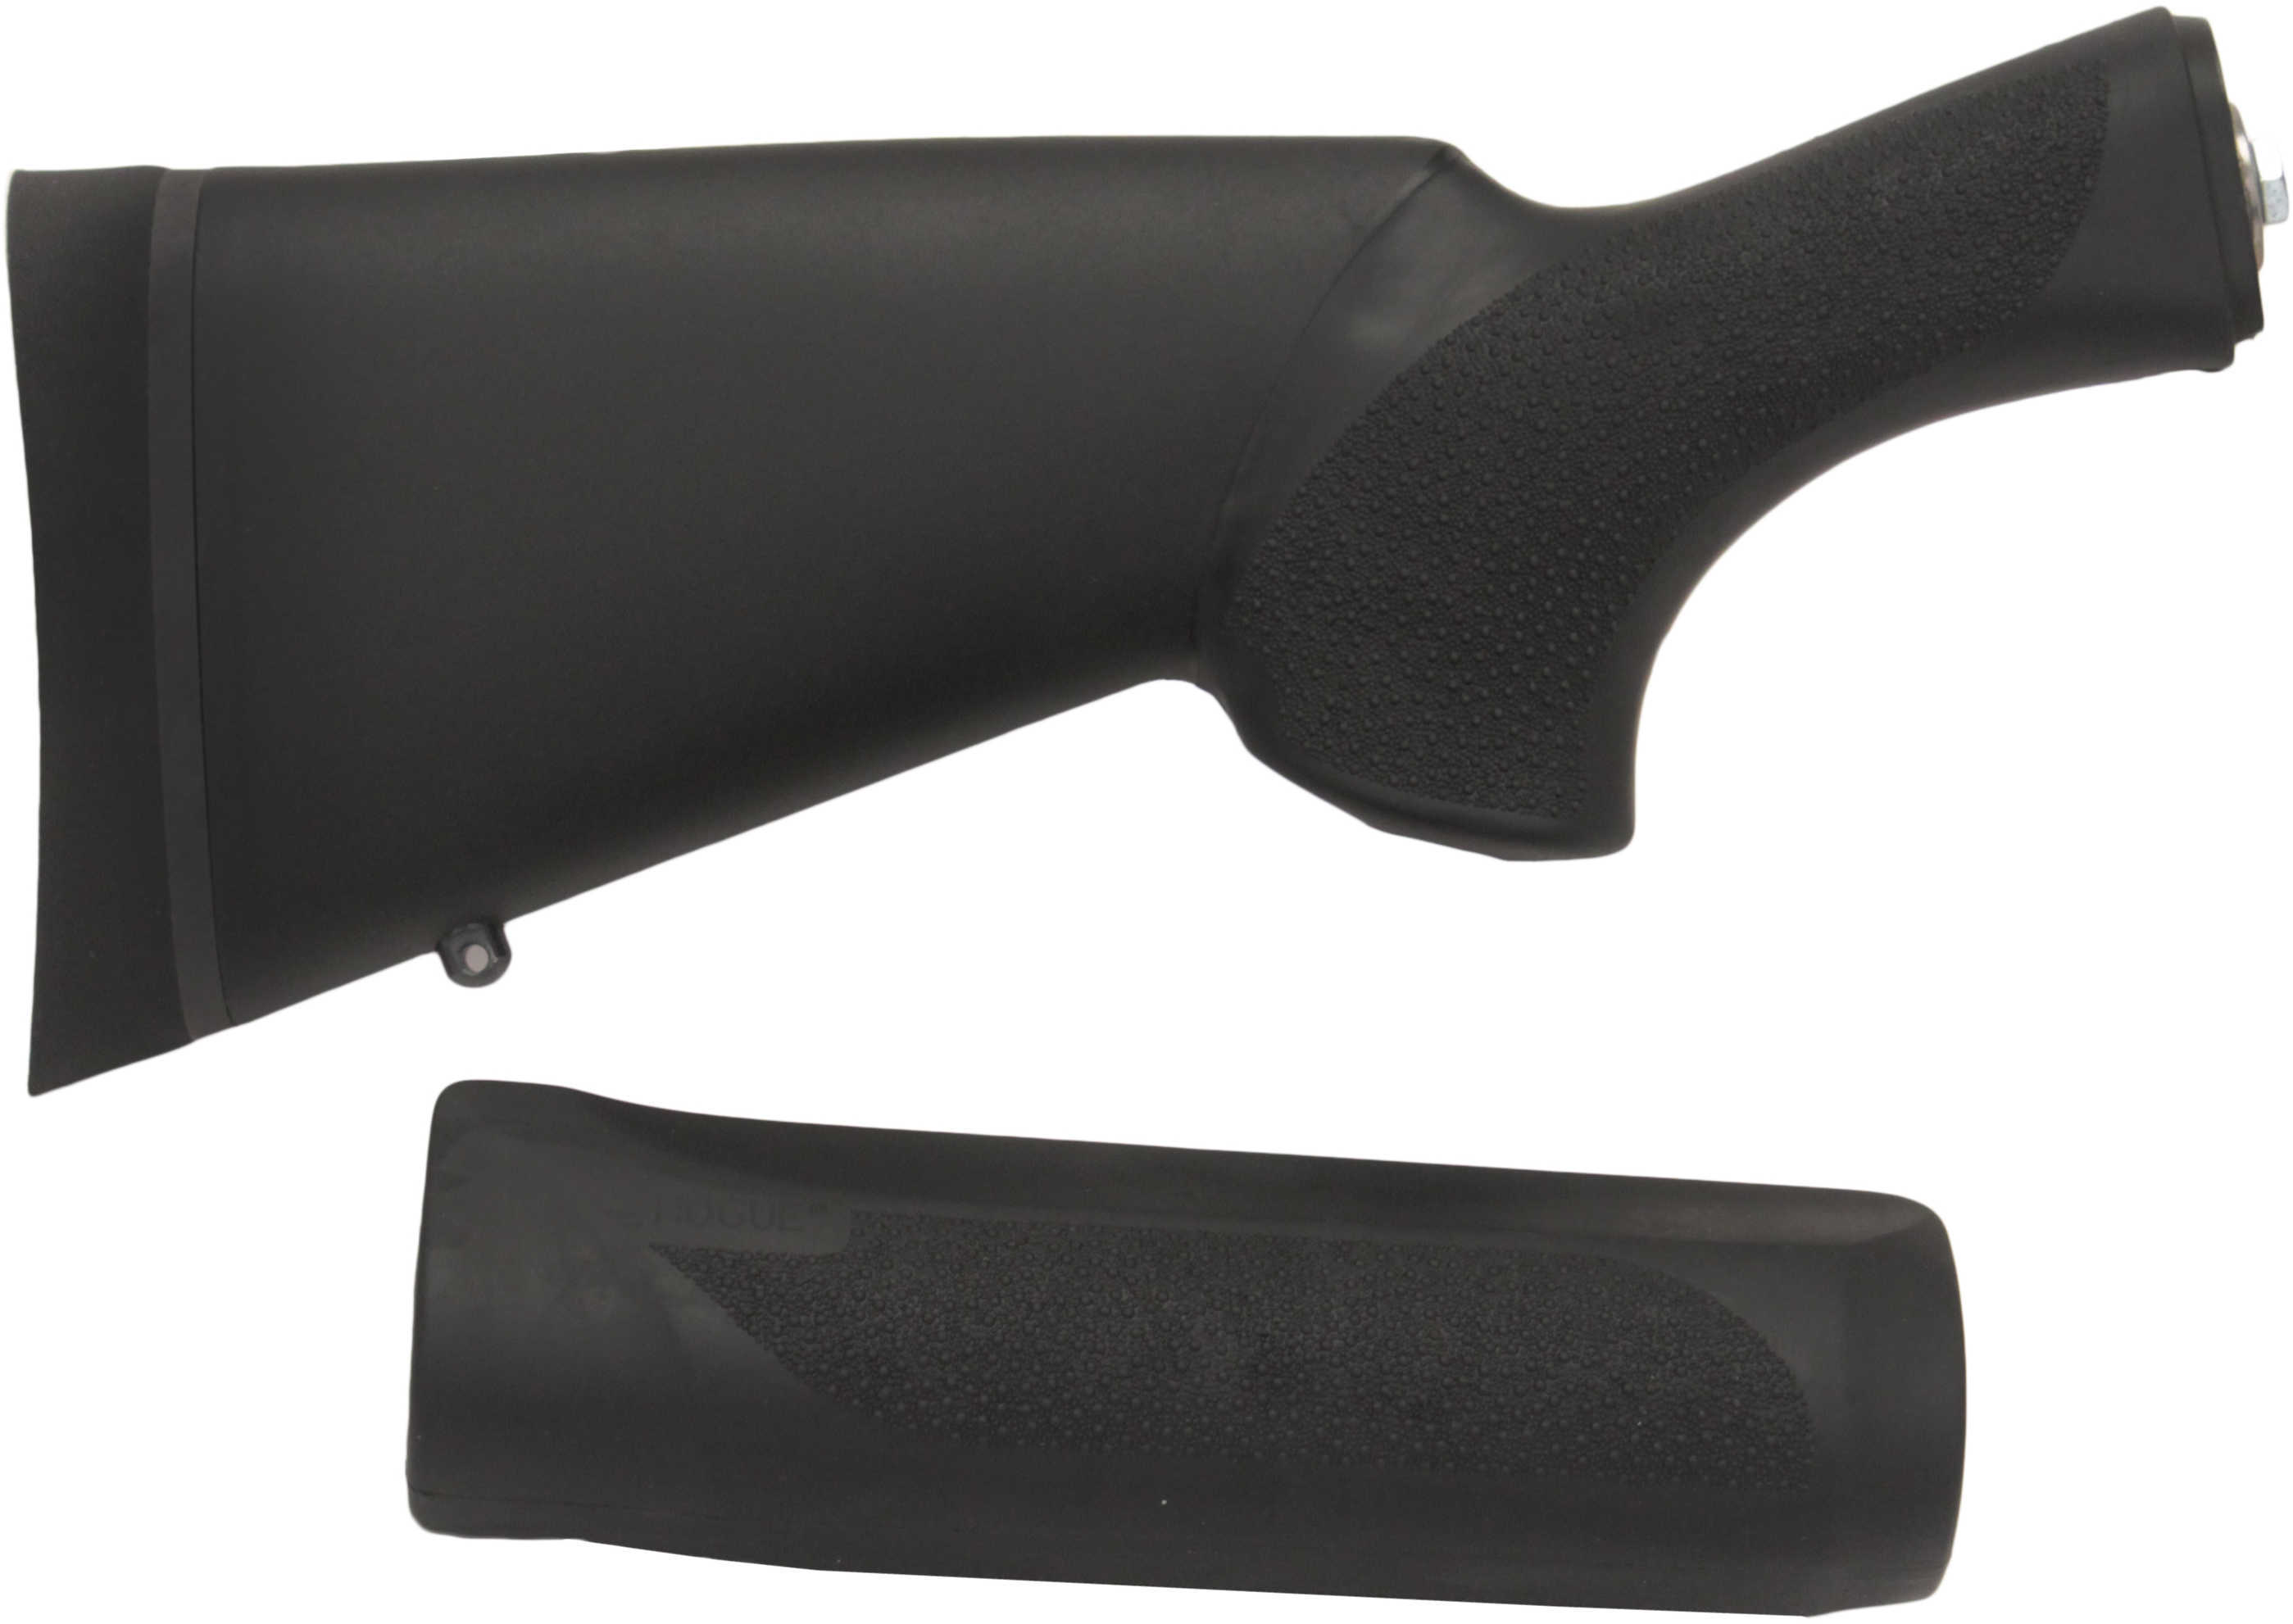 Hogue Grips Stock Over Molded Fits Remington 870 12" Length Of Pull Black 08732